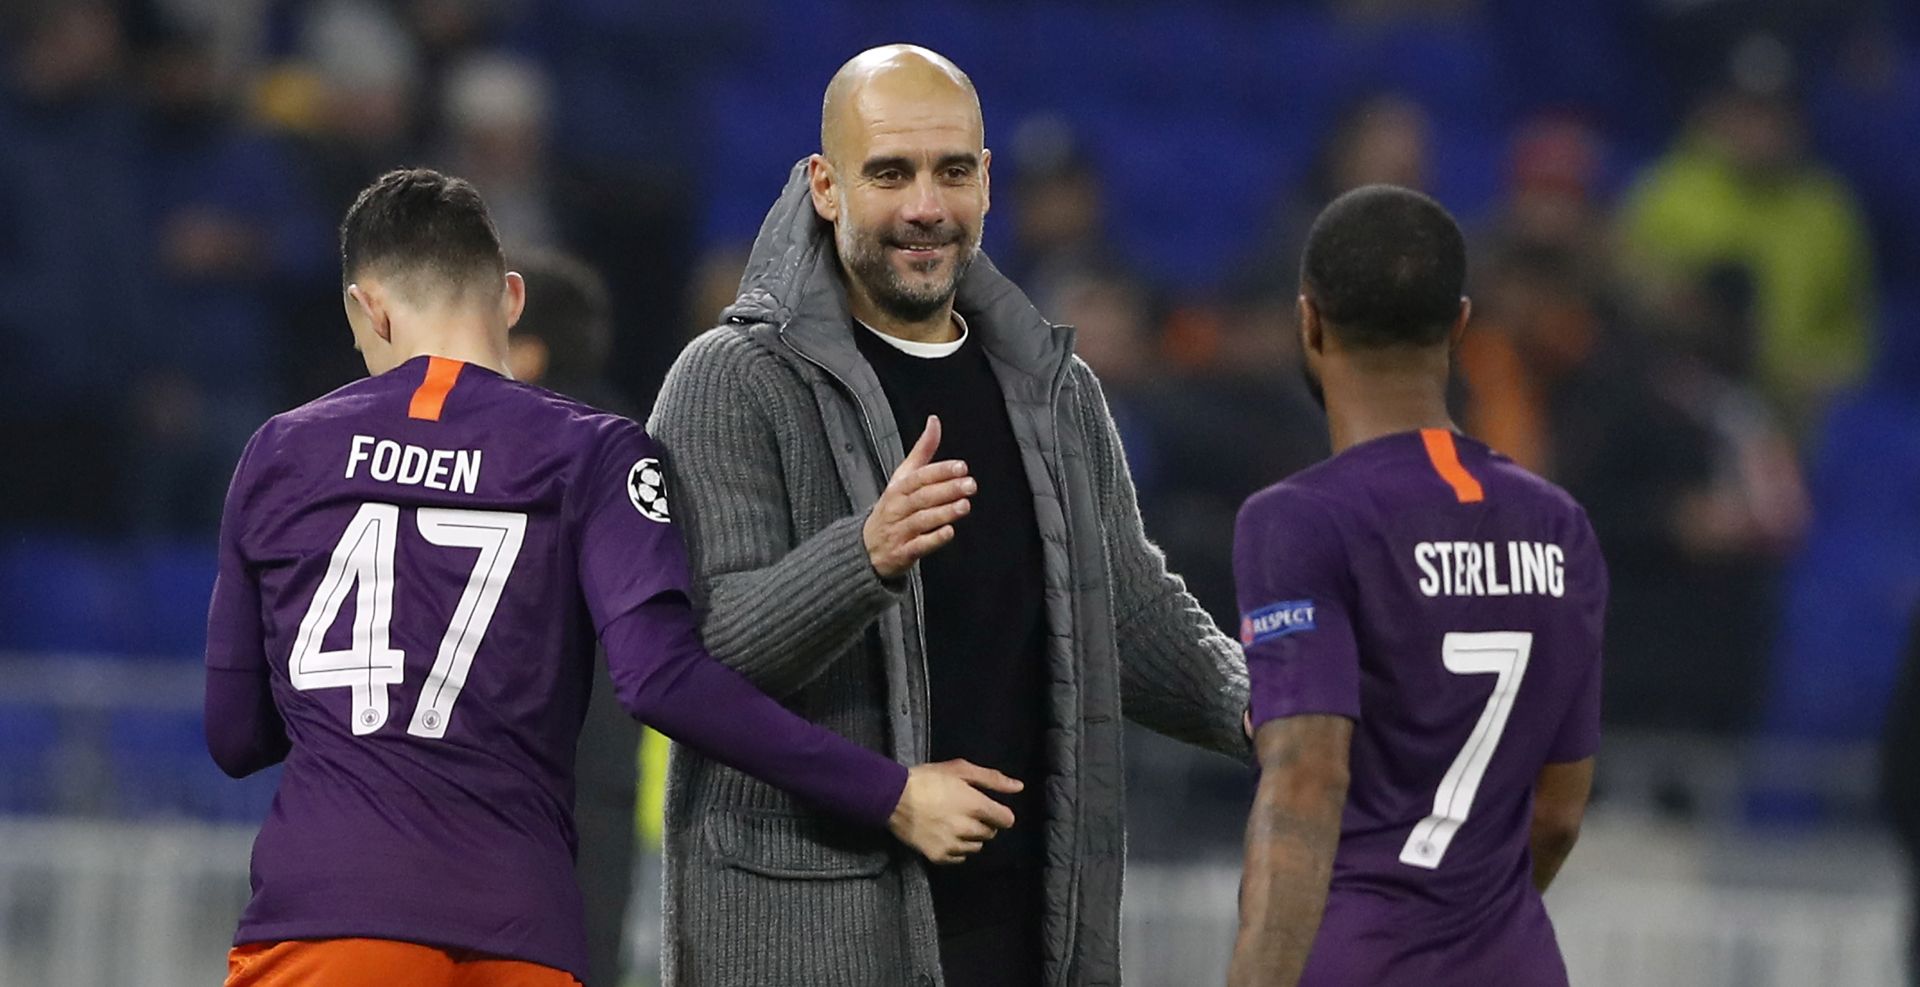 epa07193906 Josep Guardiola headcoach of Manchester City reacts with Manchester City's Phil Foden (L) and Raheem Sterling during the UEFA Champions League Group F soccer match between Olympique Lyon and Mancherster City, in Decines-Charpieu near Lyon, France, 27 November 2018.  EPA/GUILLAUME HORCAJUELO